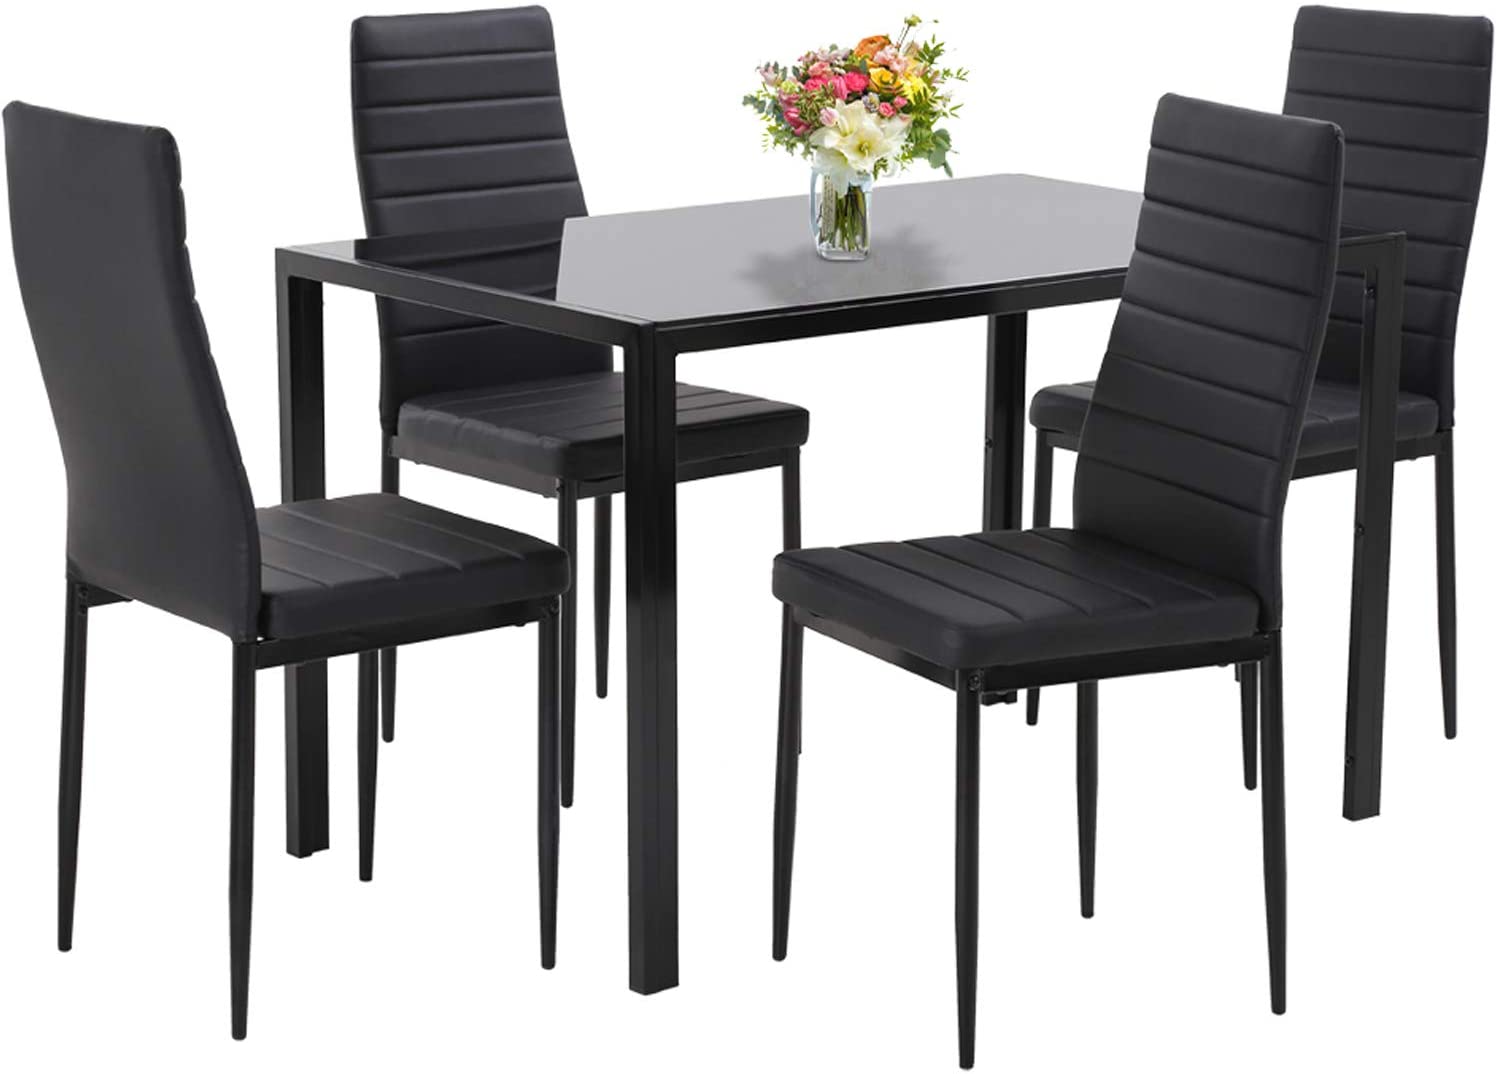 PayLessHere Metal & Faux Leather Kitchen Dining Set, 5-Piece